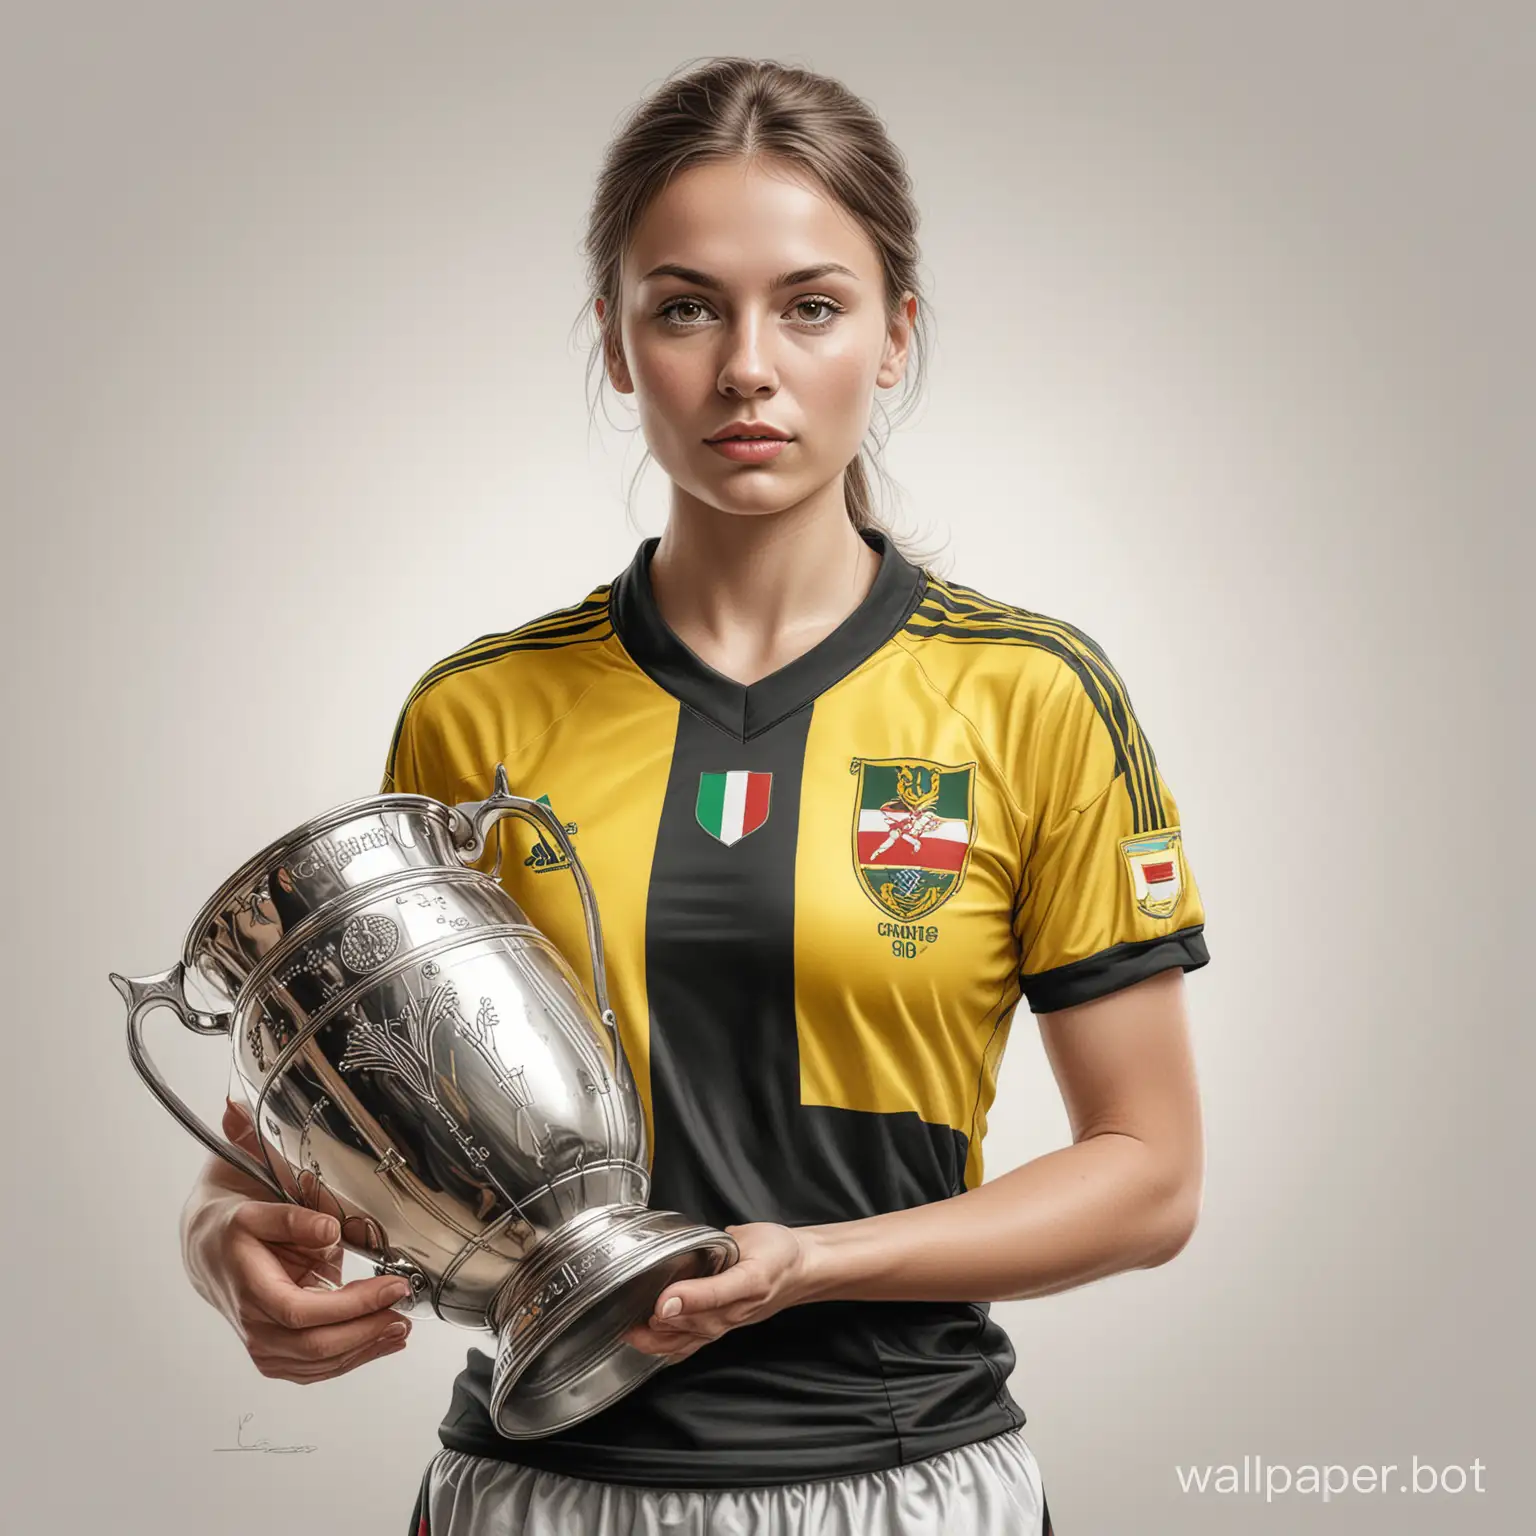 Young-Hungarian-Soccer-Champion-Holding-Trophy-in-Black-and-Yellow-Uniform-Sketch